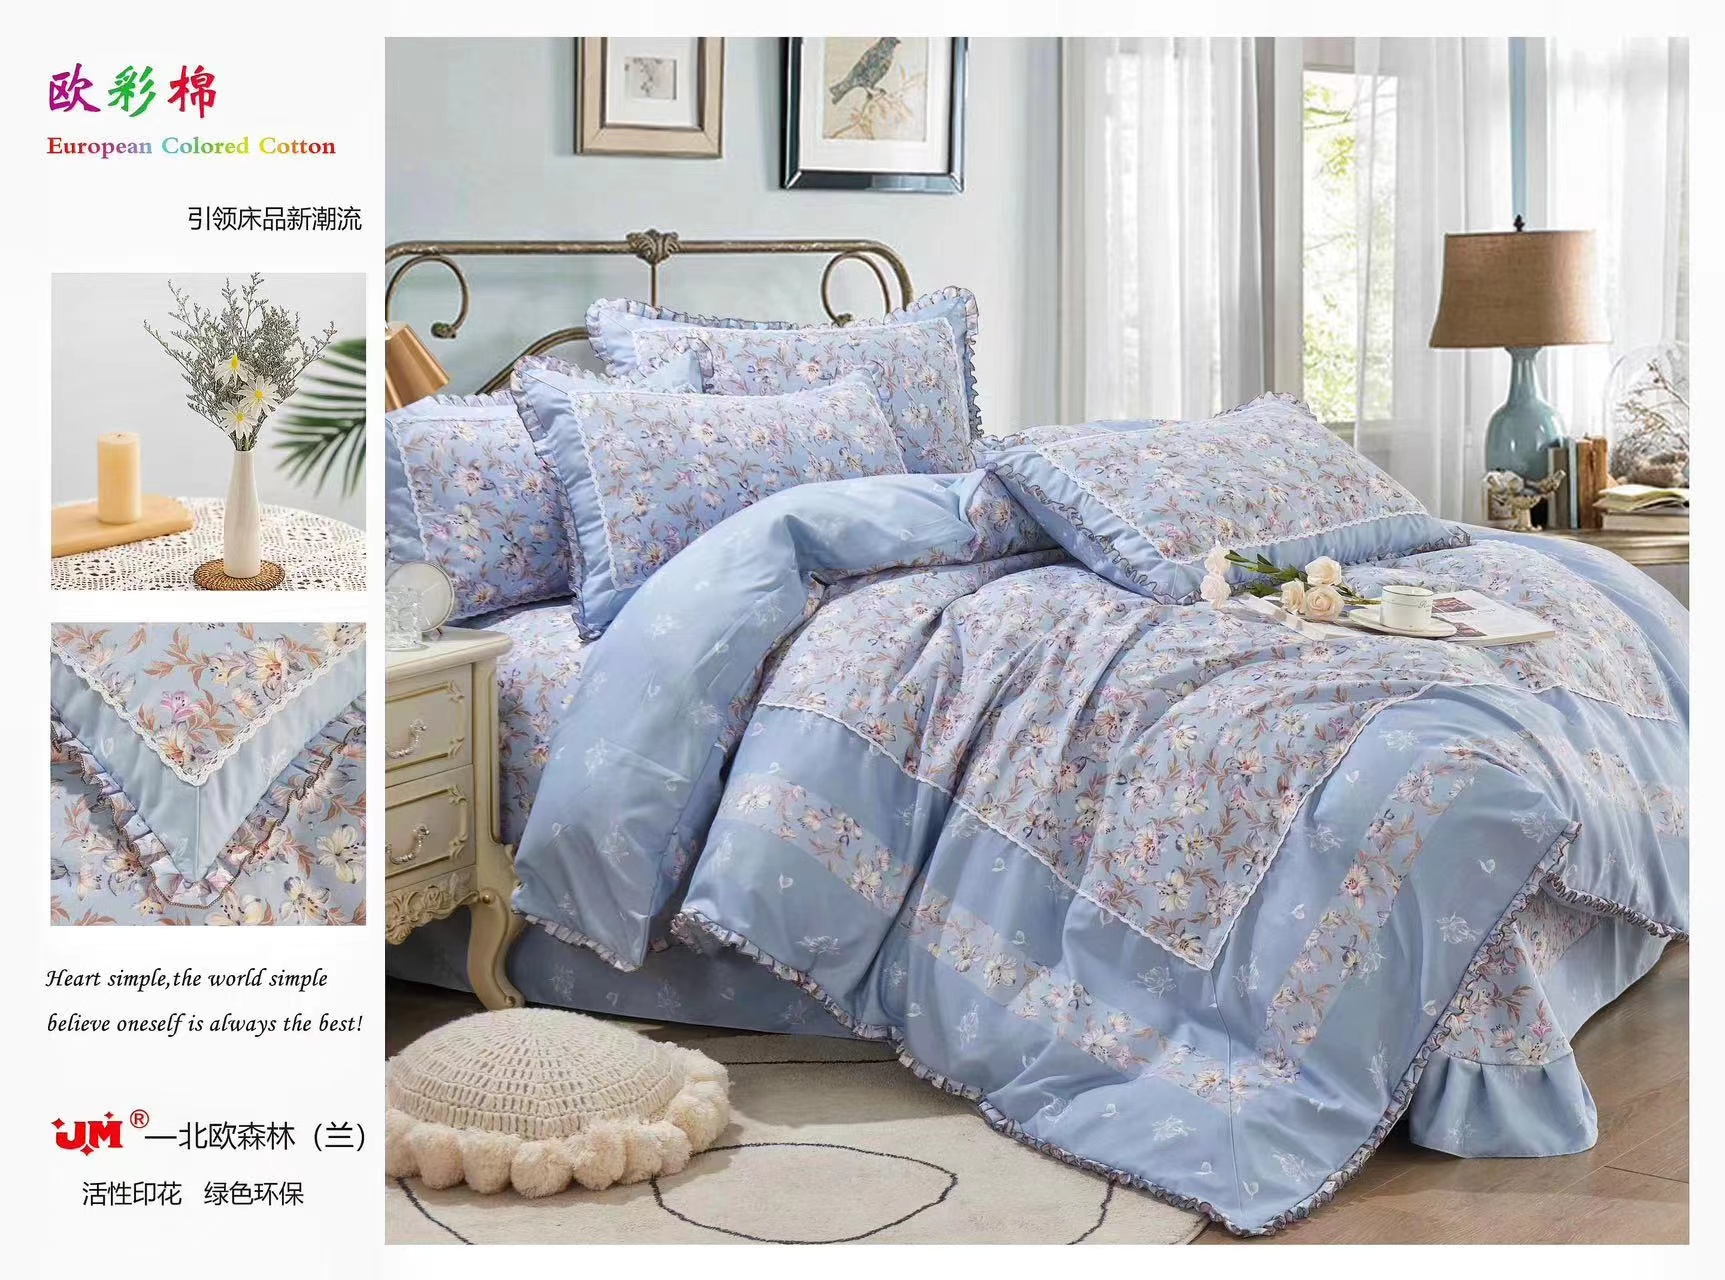 four-piece-bedding-setkorean-style-with-edges-nordic-forest-blue2021-b013602